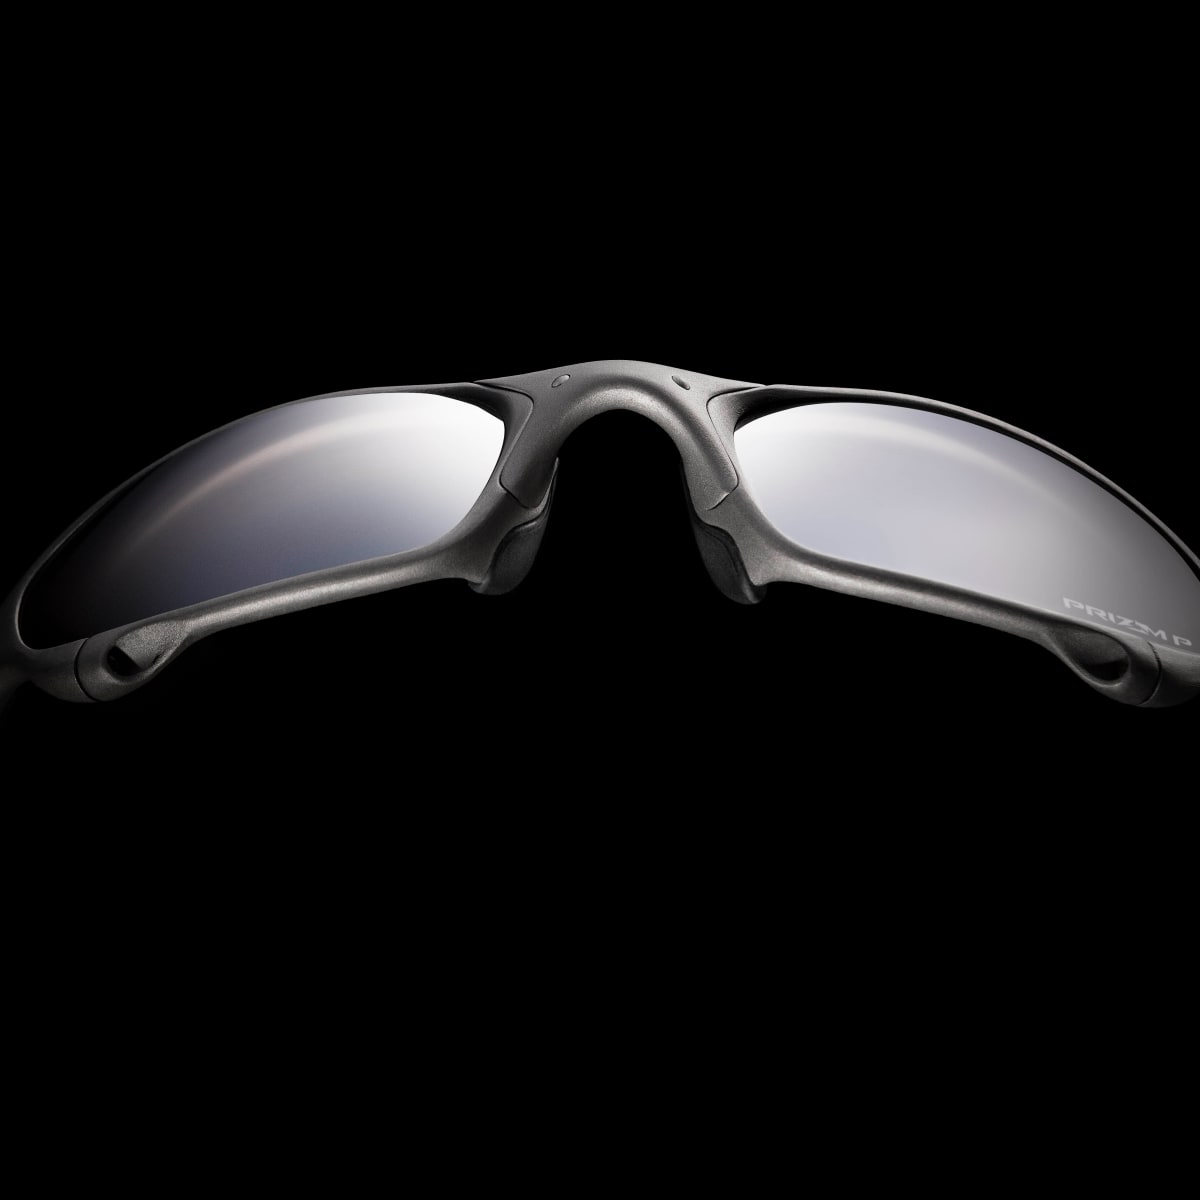 Oakley back its iconic X Metal frames a new limited edition -